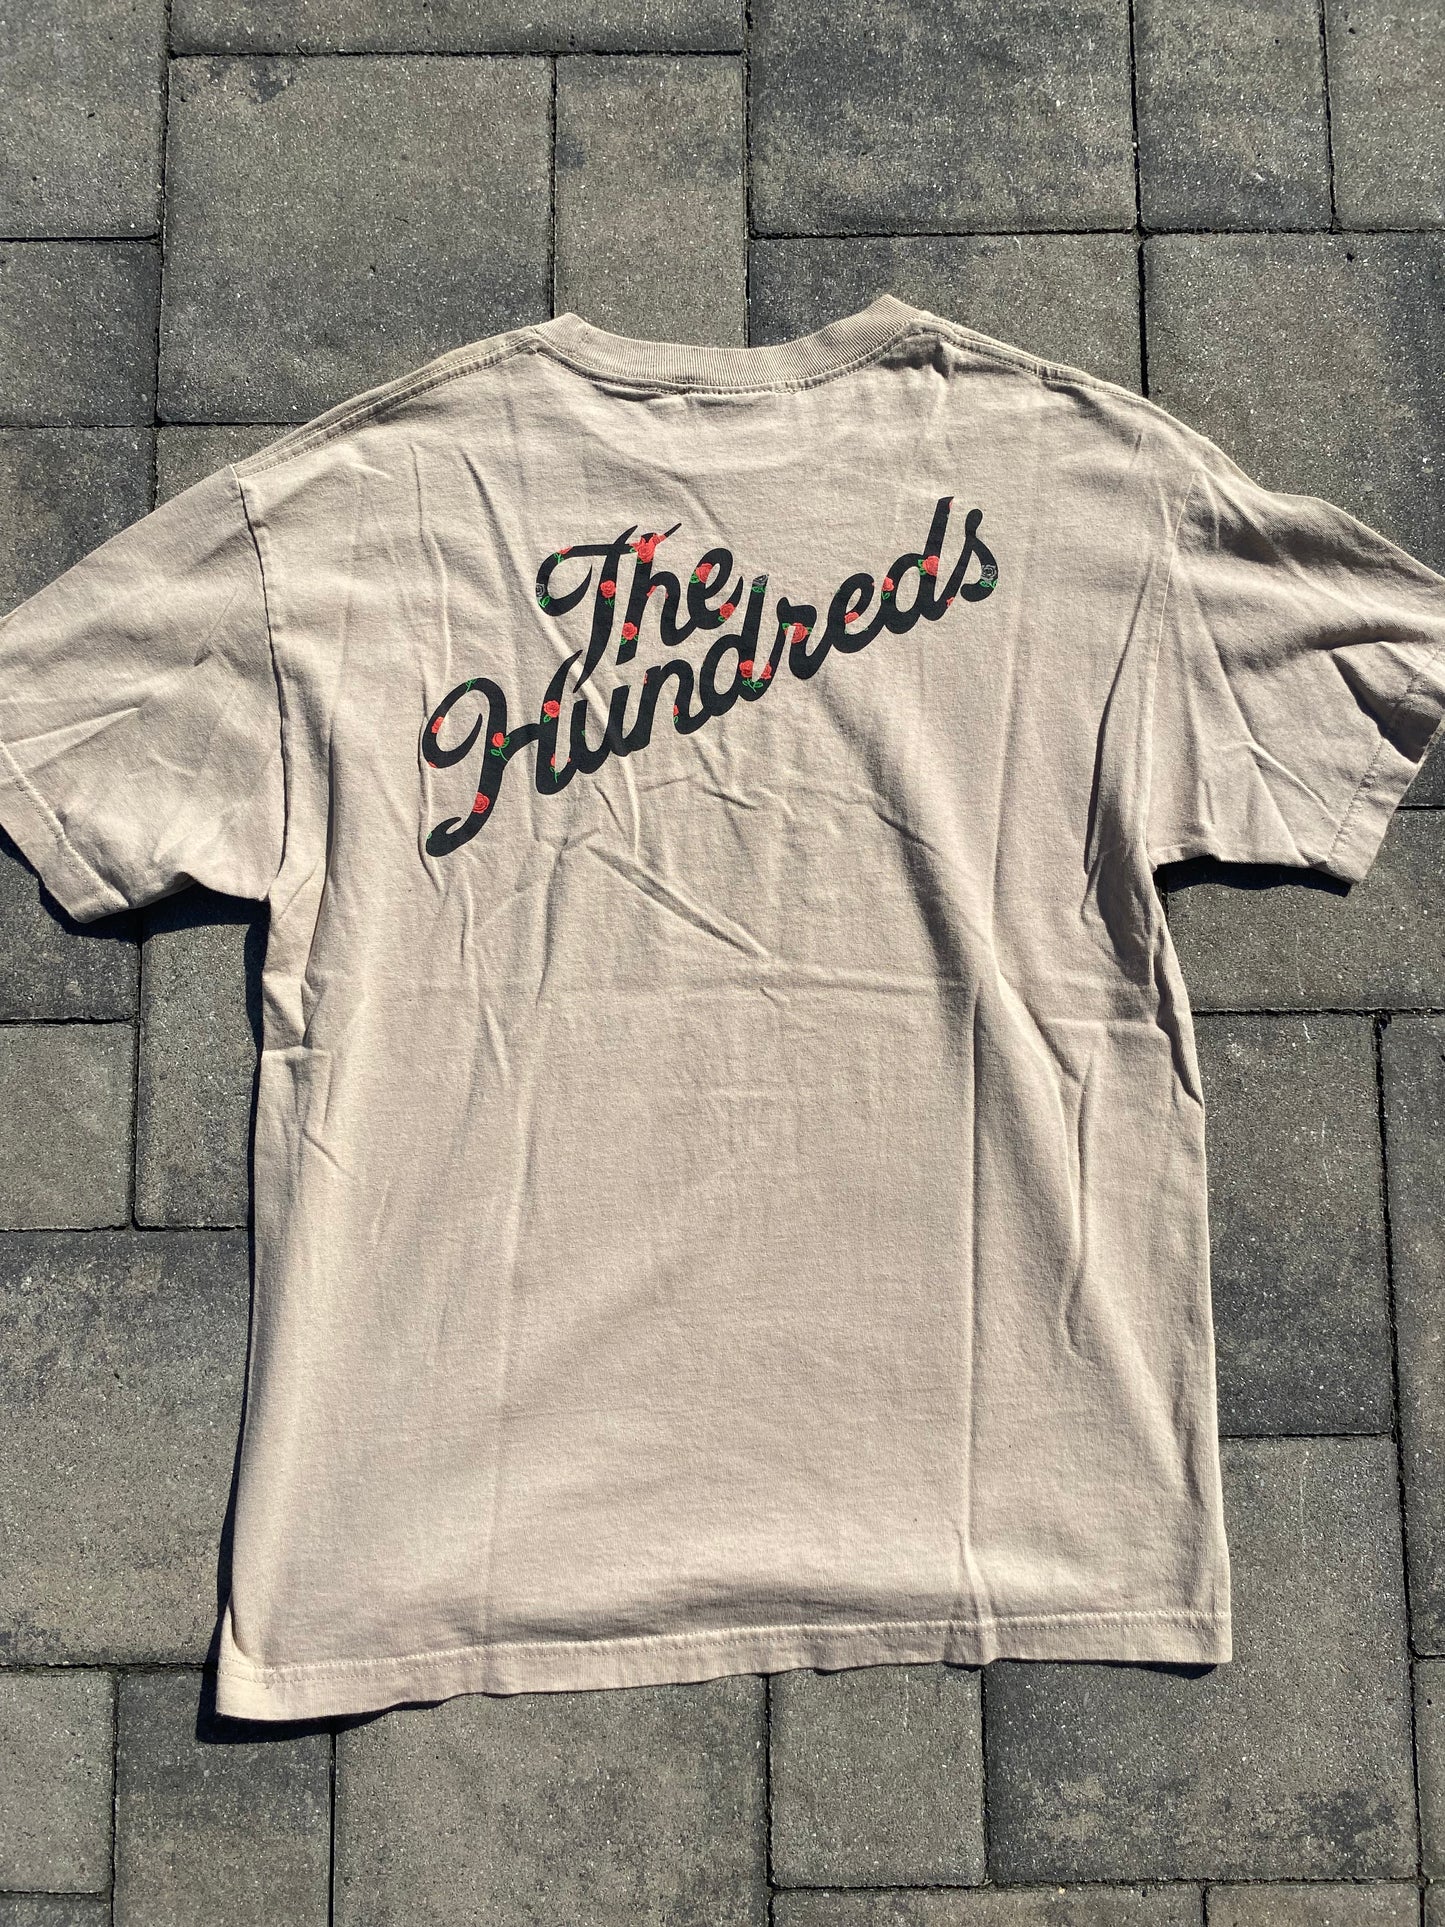 Old The Hundreds